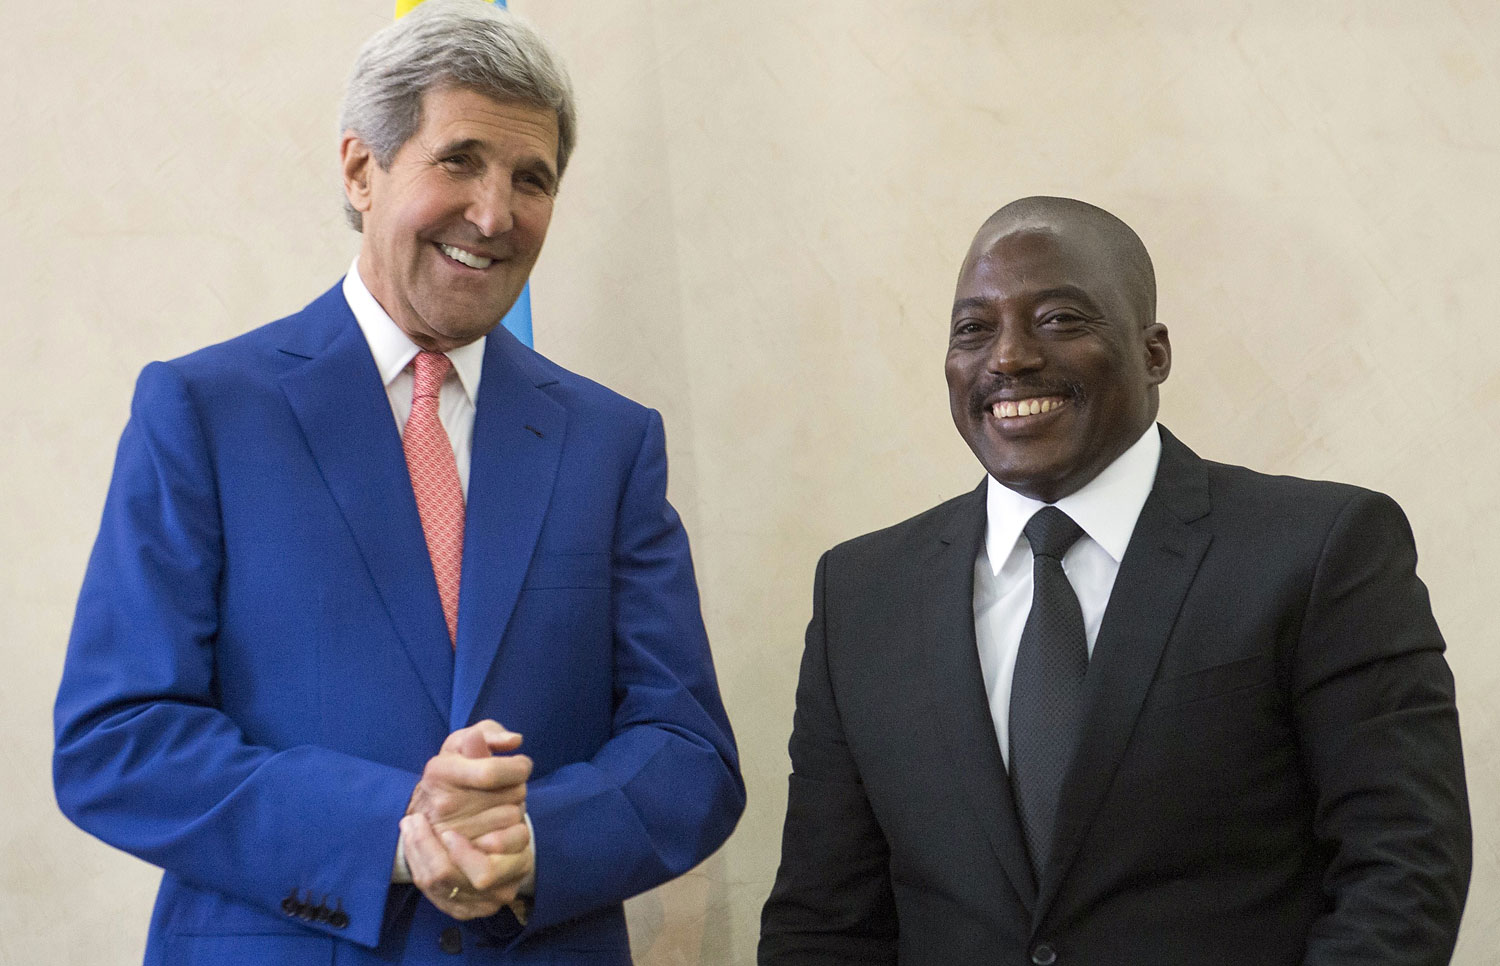 John Kerry to Congo: U.S. Will Give $30M If President Steps Down | Time